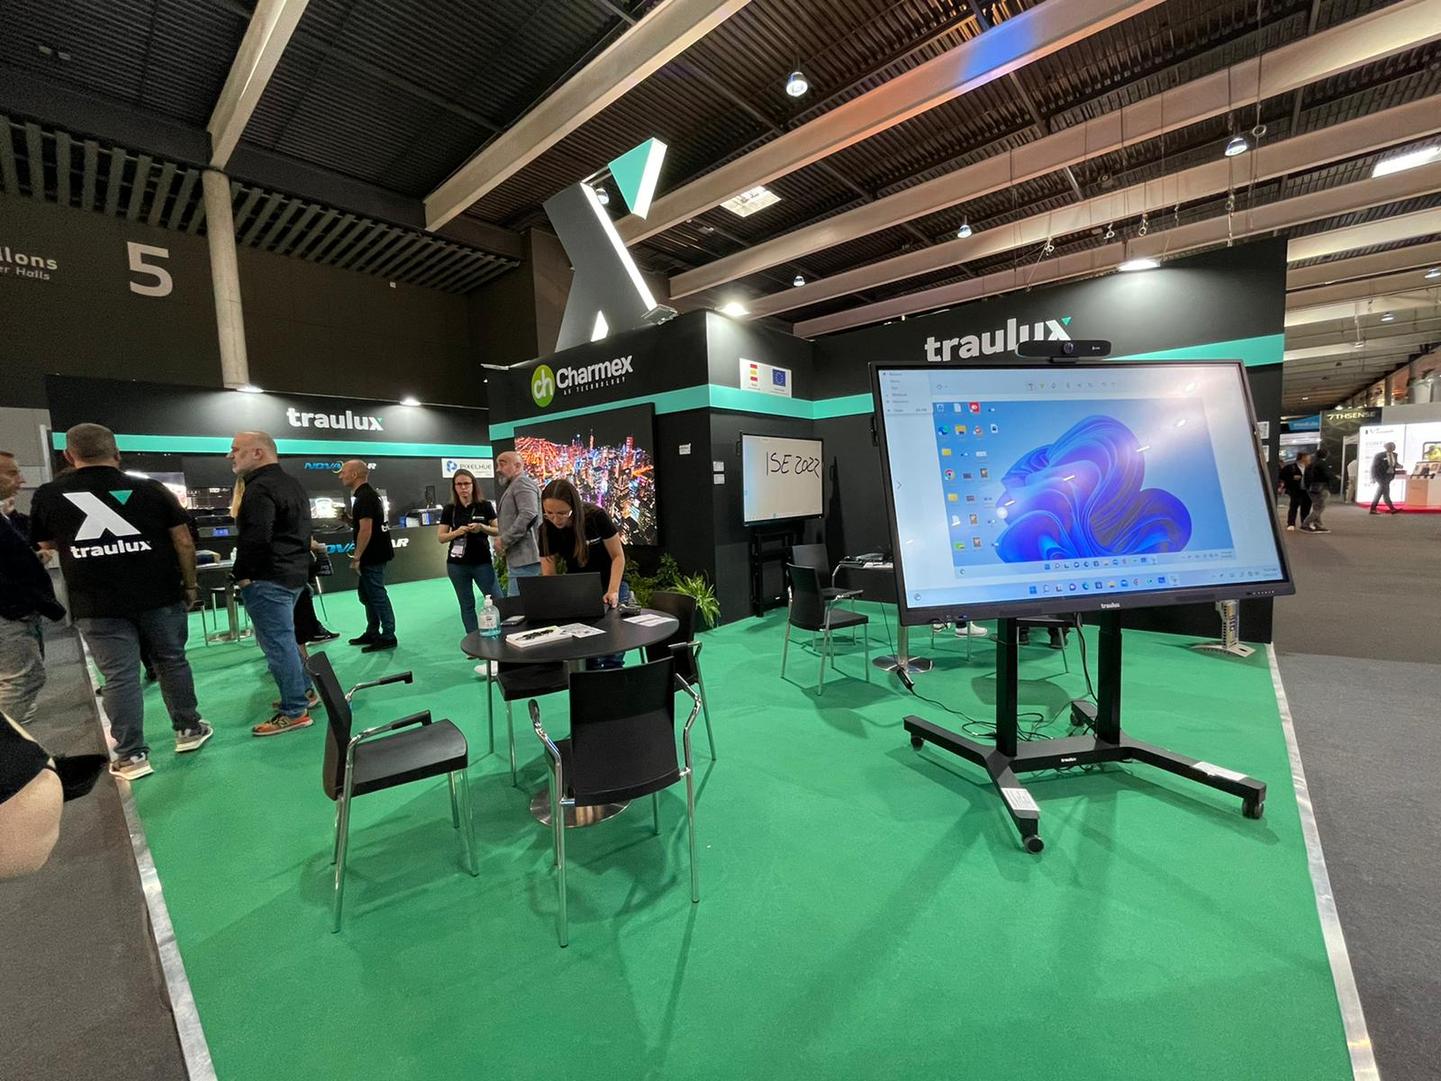 Charmex lands at ISE 2022 with its full range of Led screens and Traulux interactive monitors